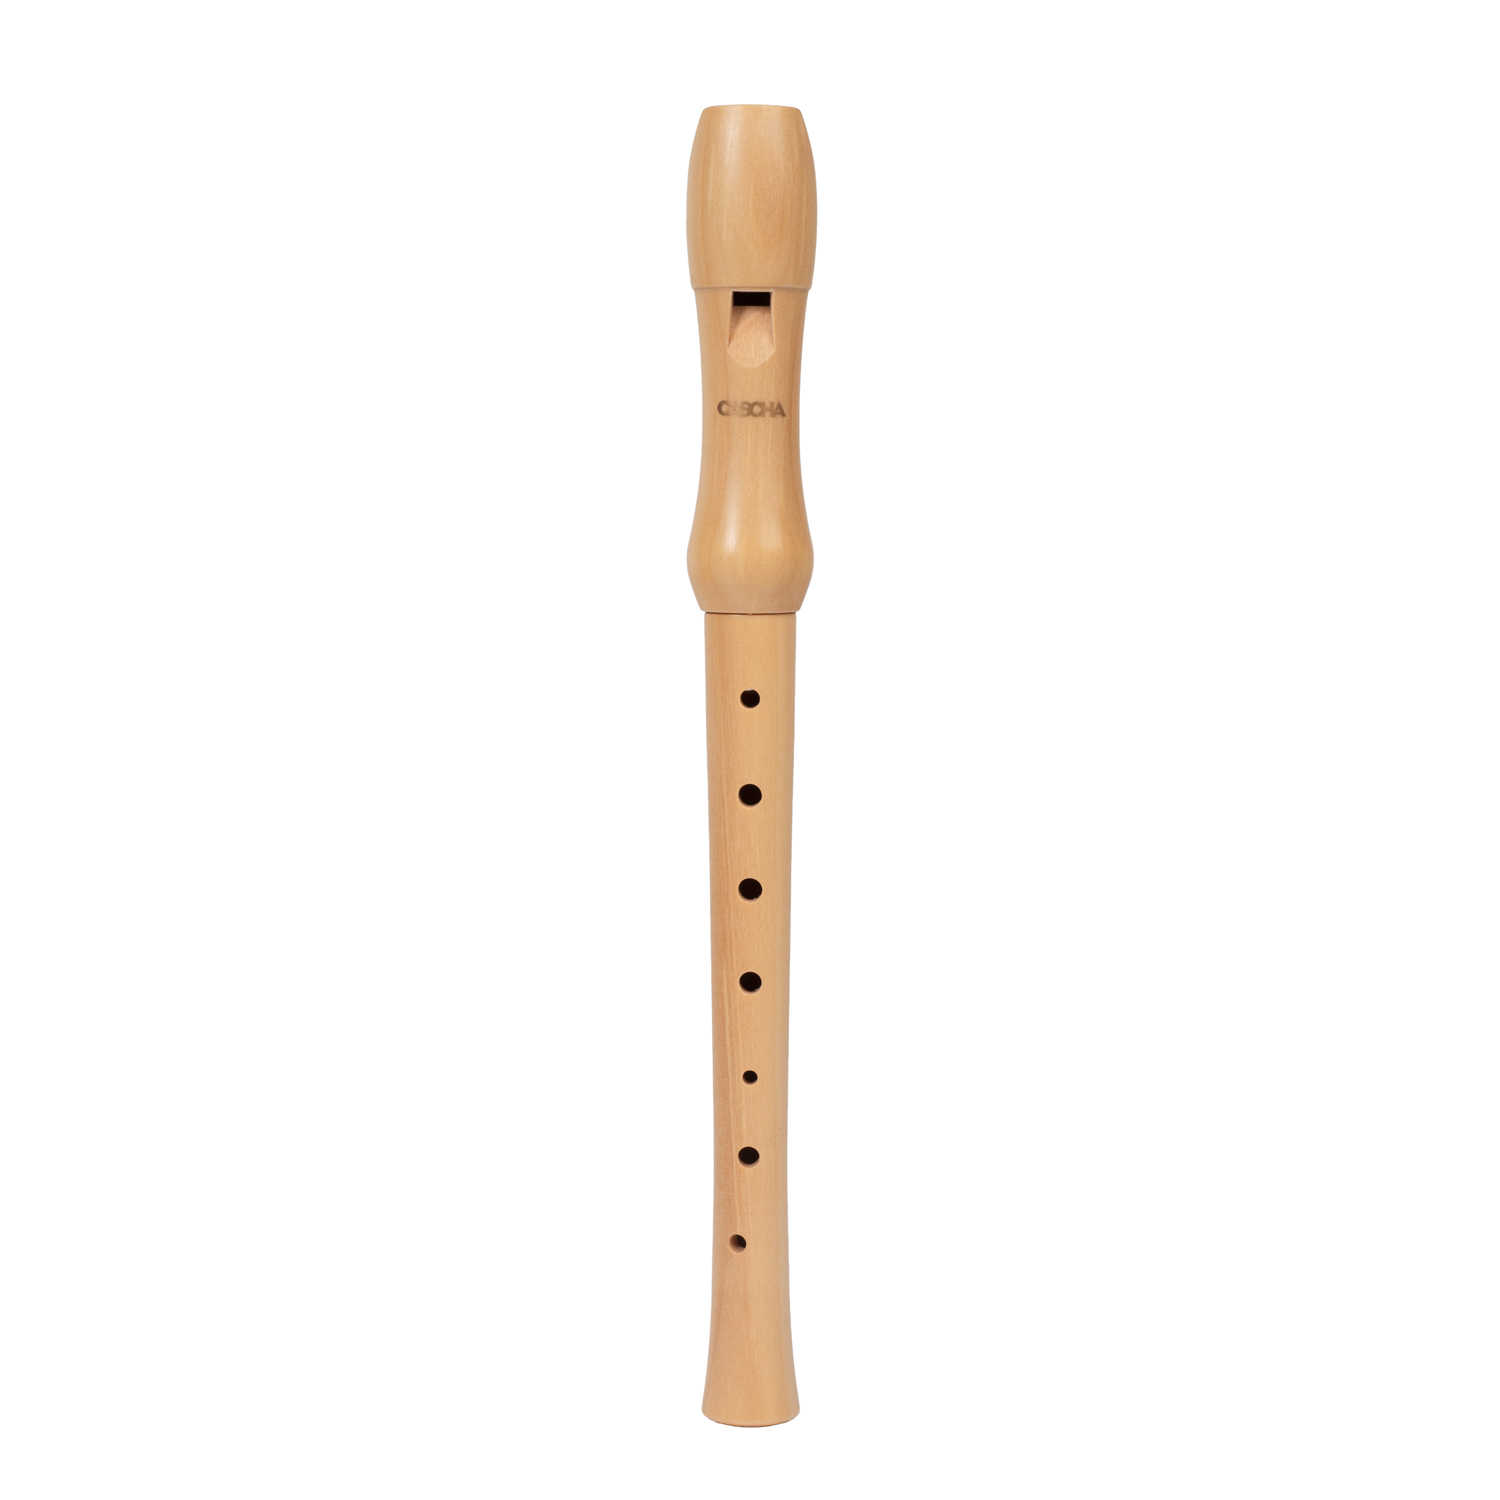 Wooden Children and Beginners from 6 Years Soprano Recorder in C with Bag and Flute mop CASCHA Made of Maple HH 2074 German Fingering 